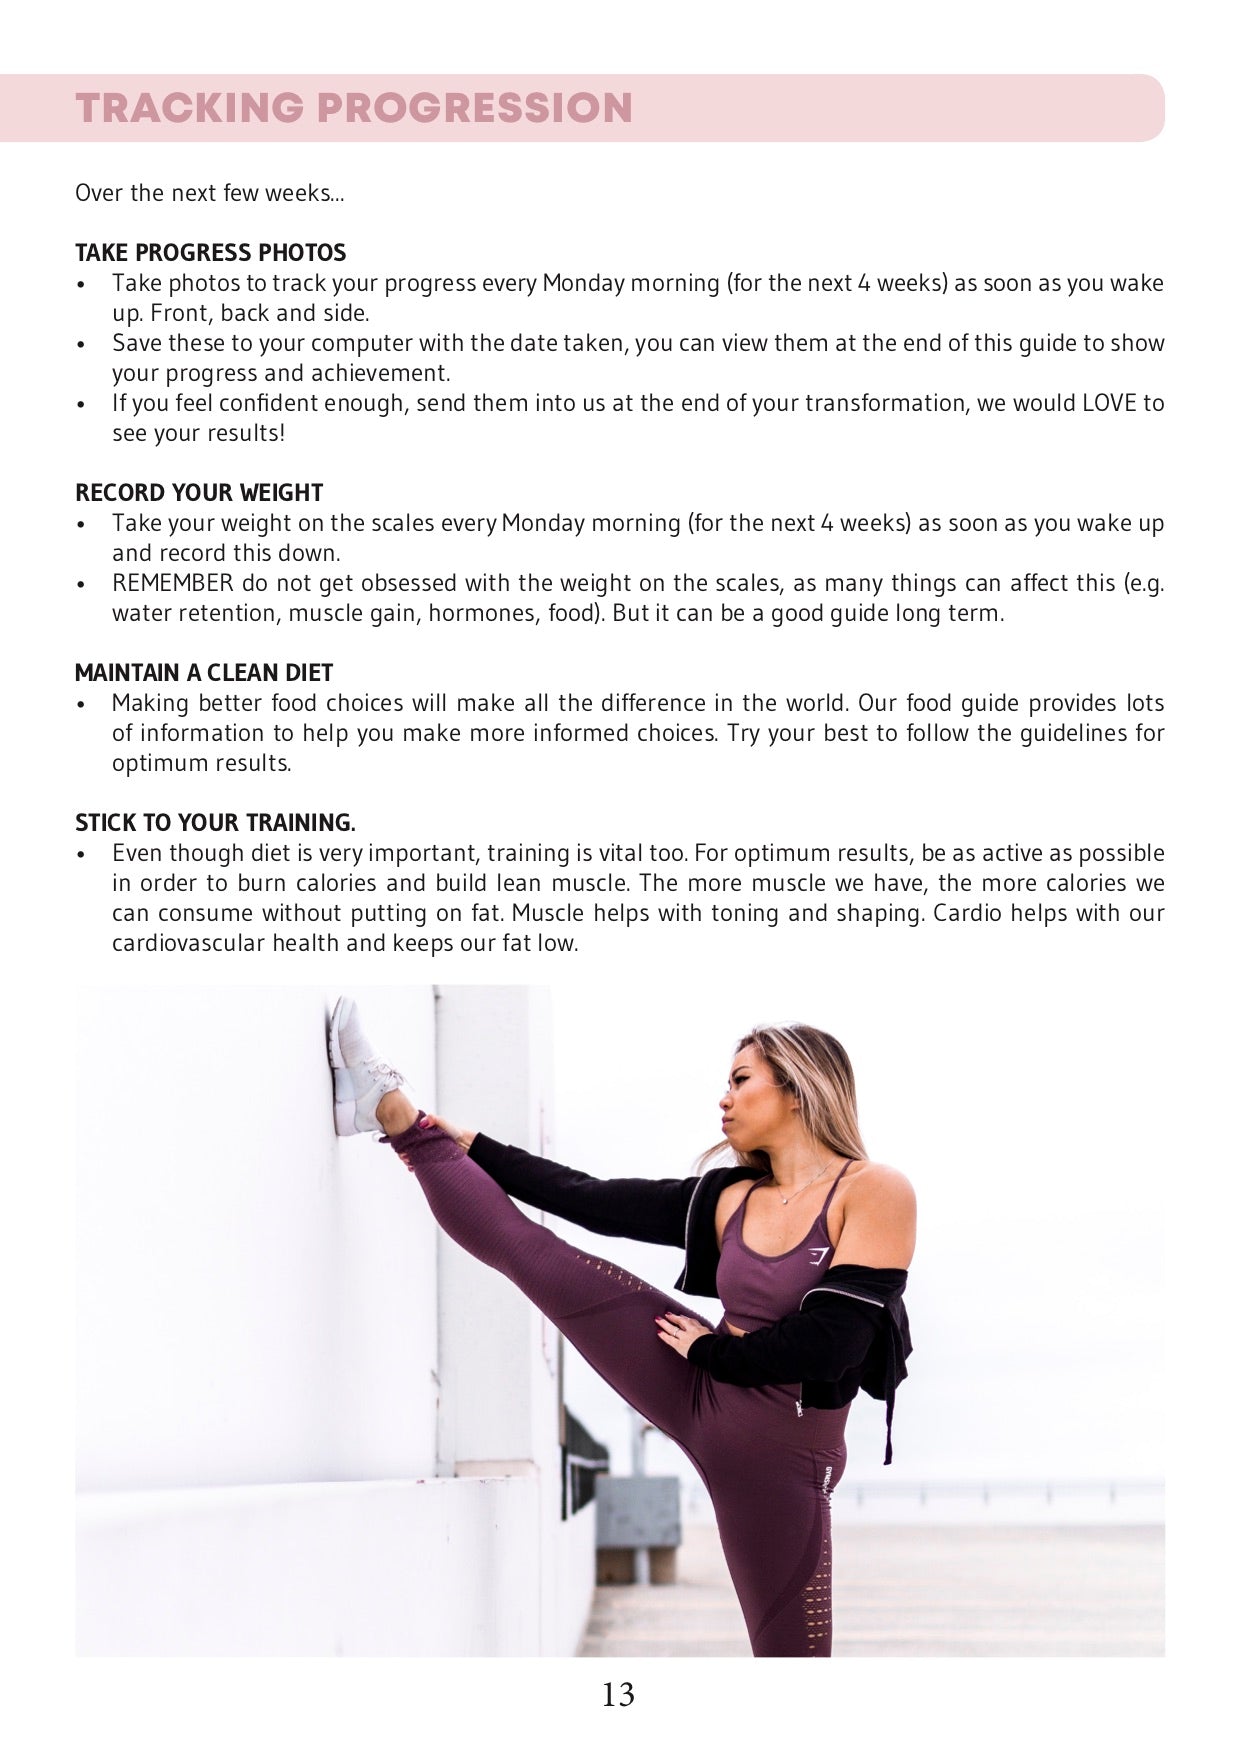 LUXE 4 Week Workout + Meal Plan E-Guide Bundle